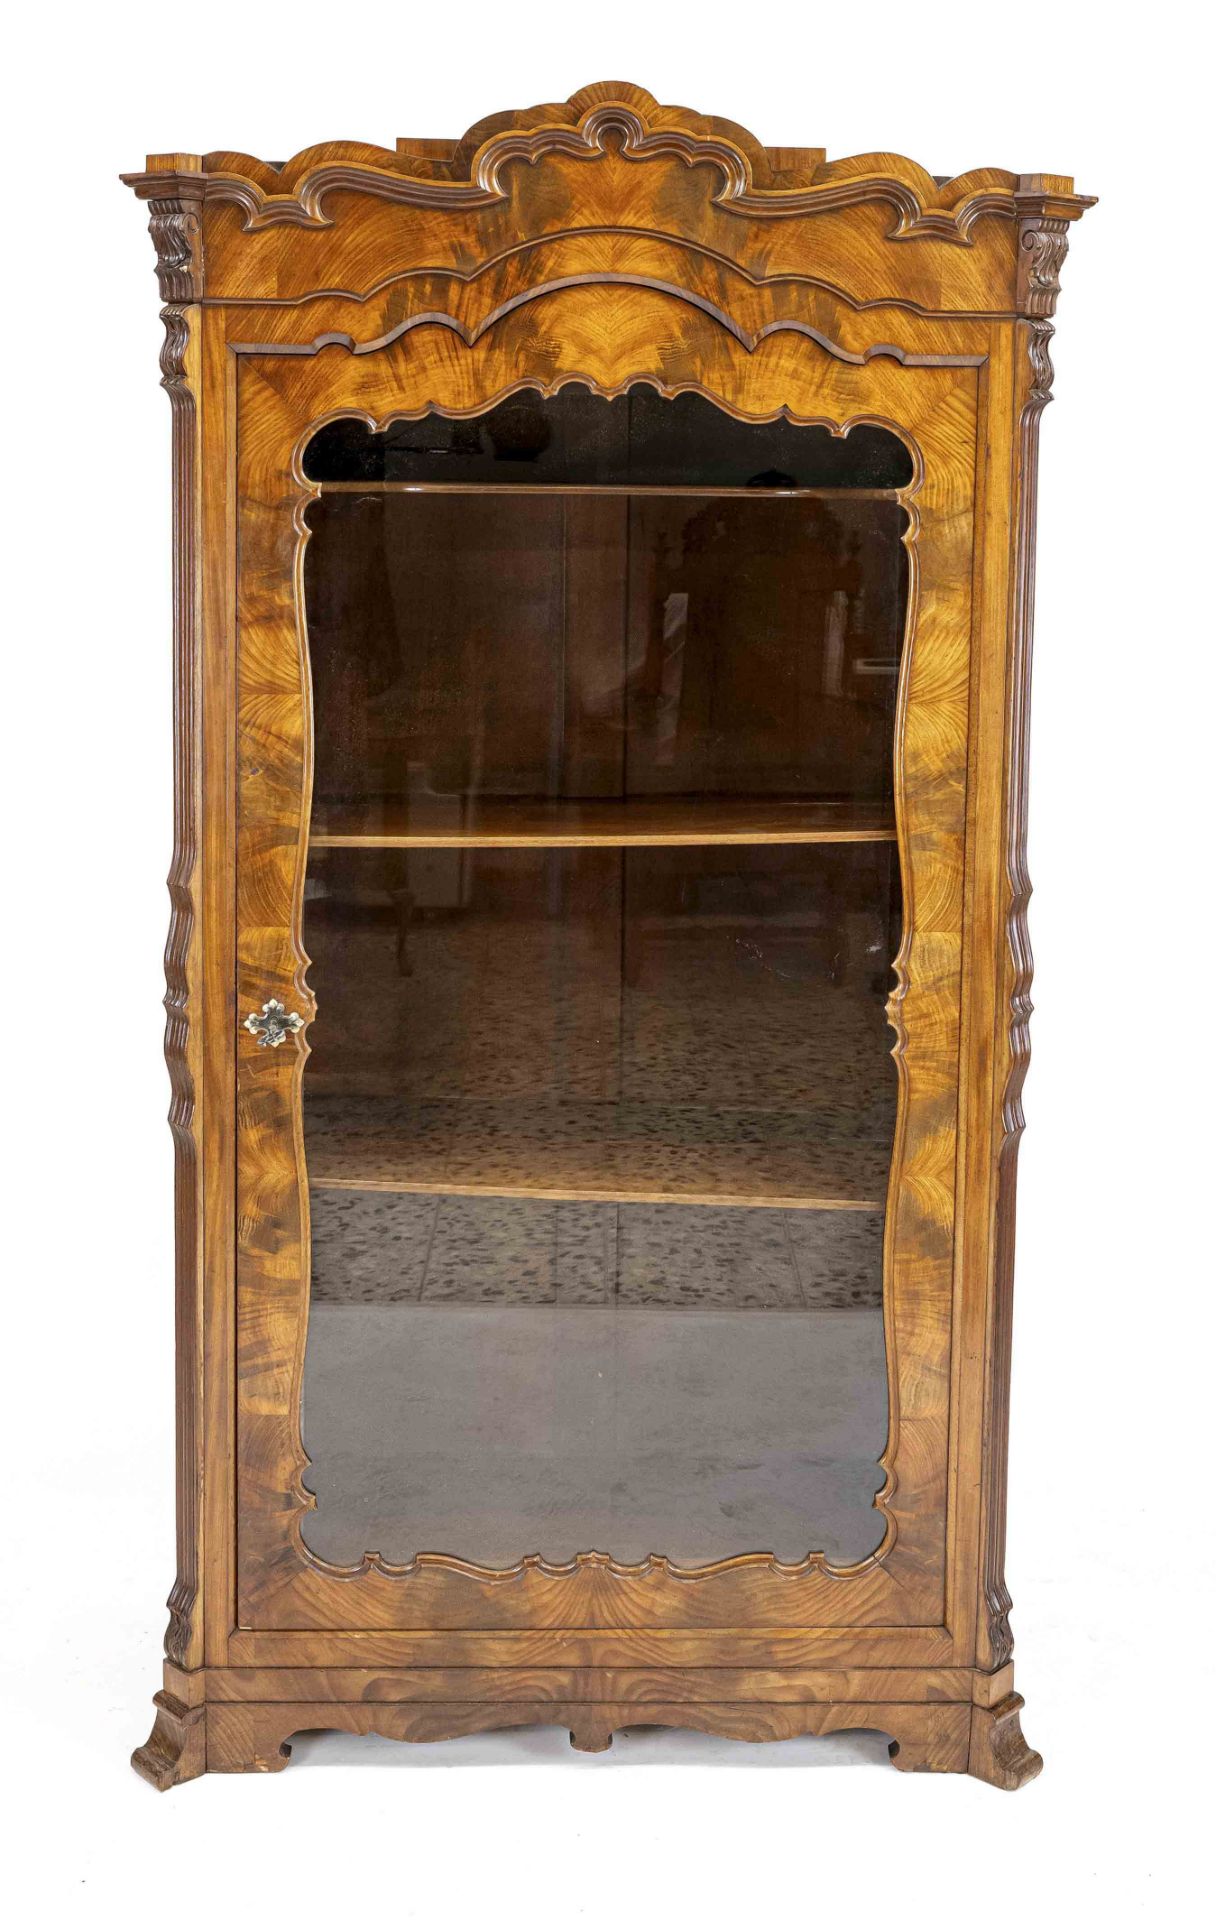 Display case, Louis-Phillippe circa 1860, mahogany, 1-door glazed body, ready to live in, 180 x 94 x